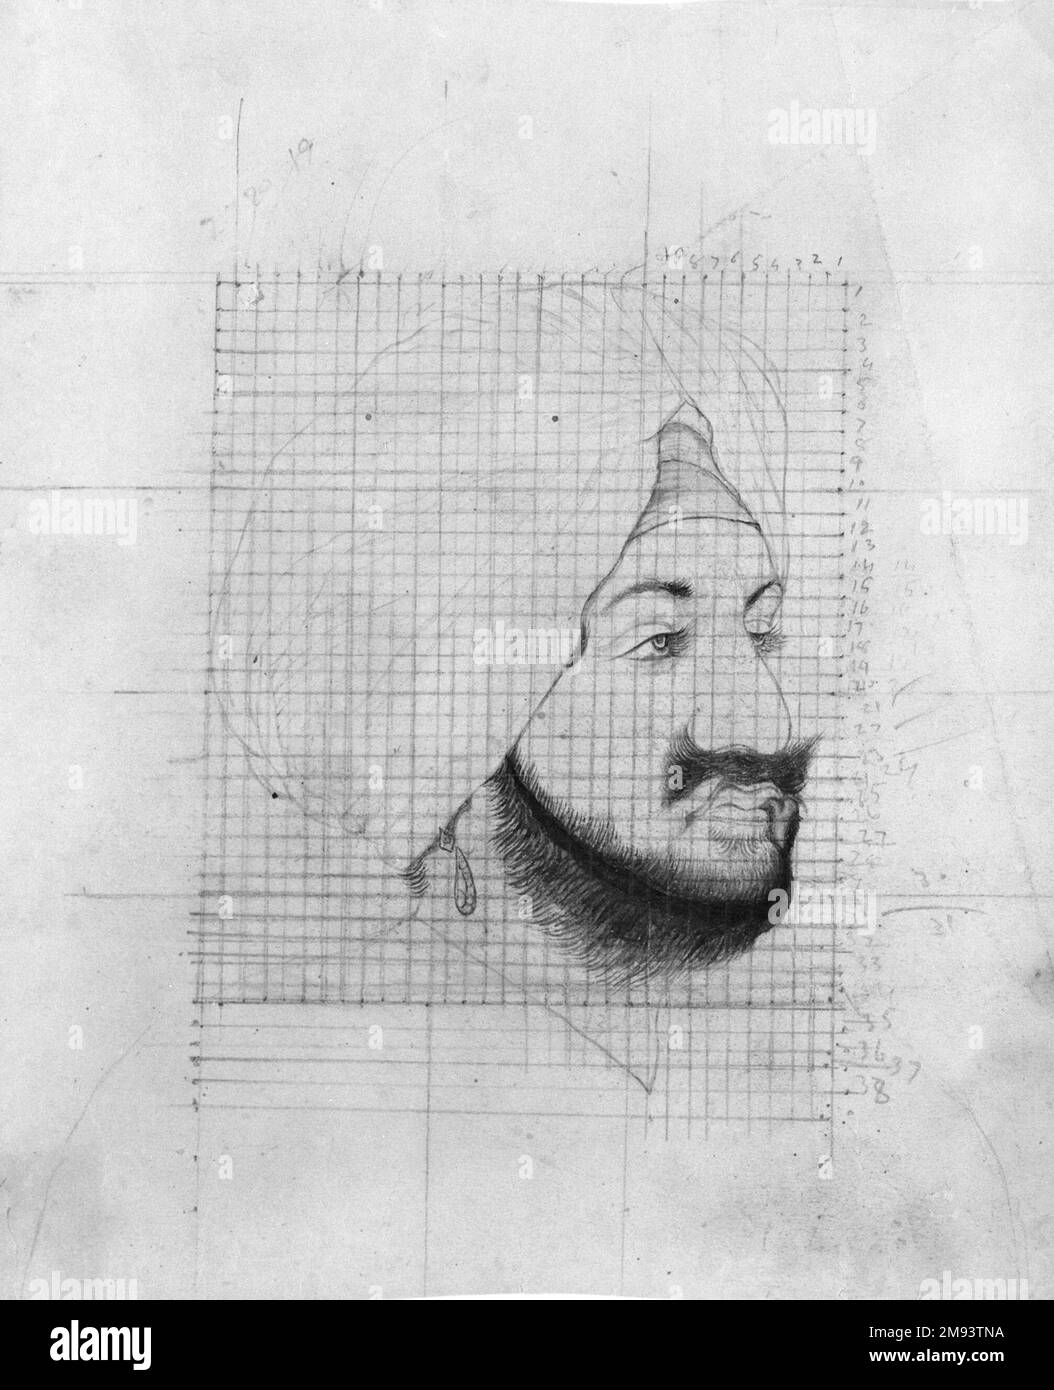 Portrait of the Maharaja of Patiala Indian. Portrait of the Maharaja of Patiala, early 20th century. Pencil, ink, and color on paper, sheet: 6 1/2 x 9 in. (16.5 x 22.9 cm).   Asian Art early 20th century Stock Photo